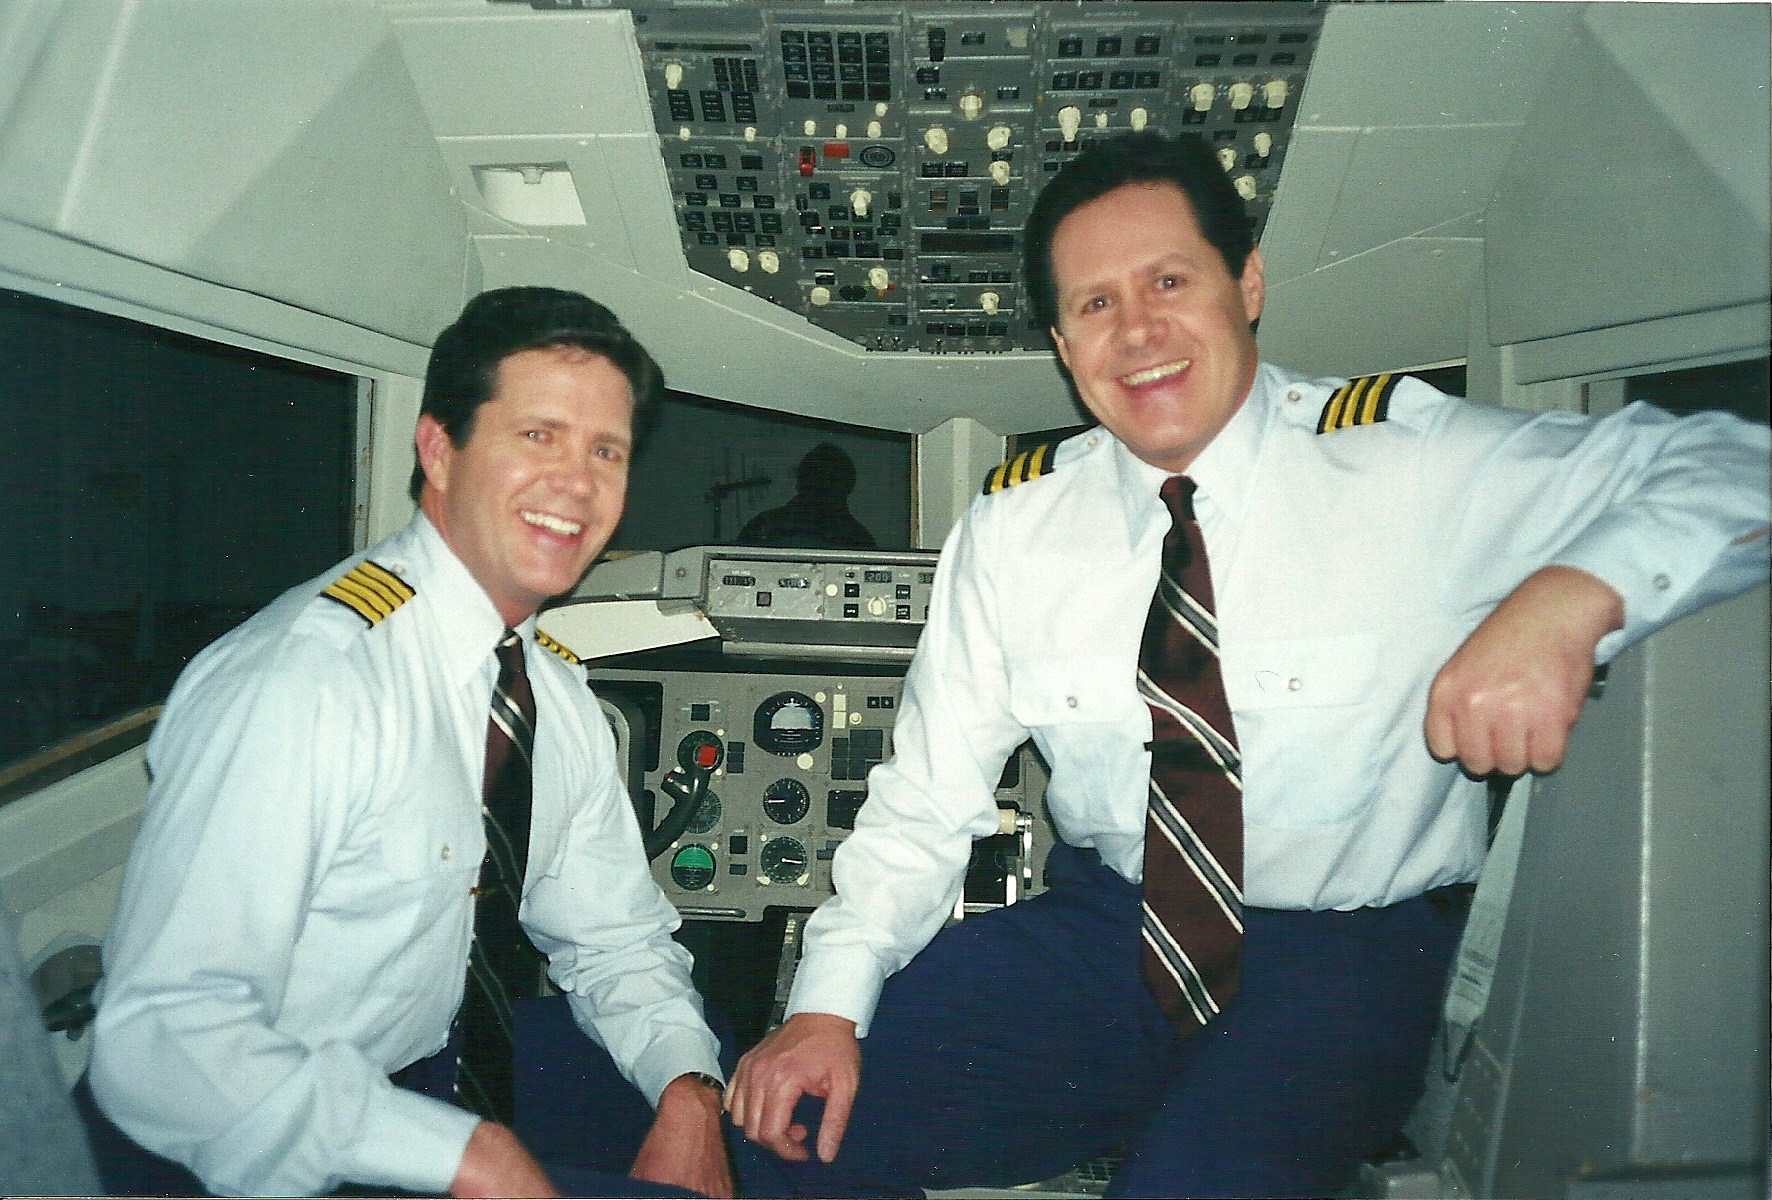 Butch and Ben McCain playing Airline Pilots on Marshall Law for CBS.